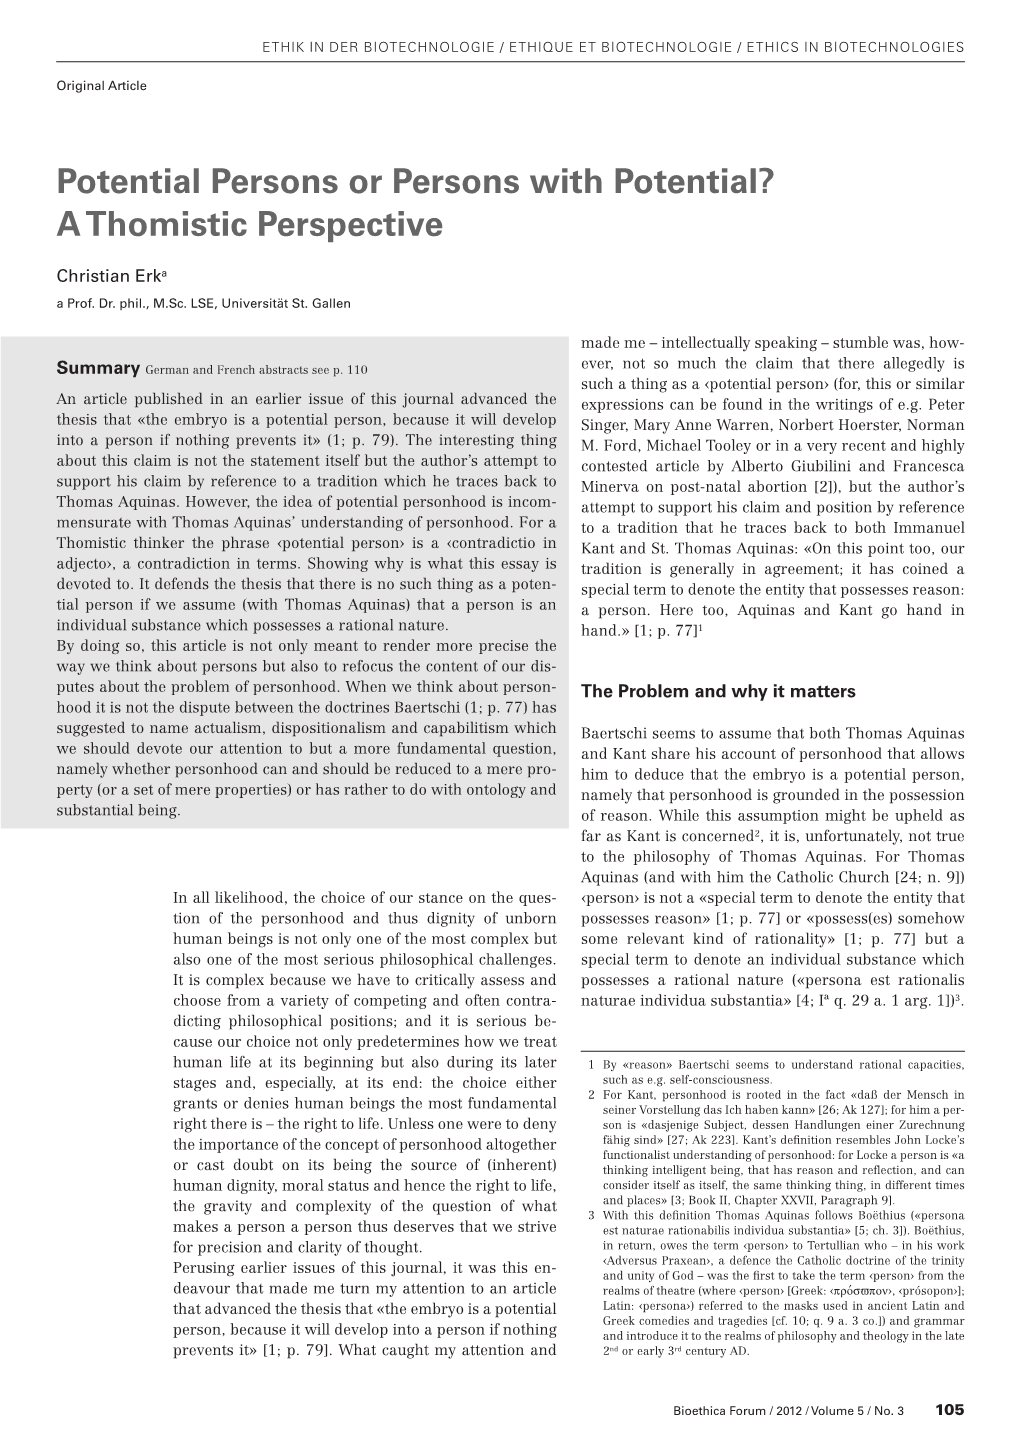 Potential Persons Or Persons with Potential? a Thomistic Perspective